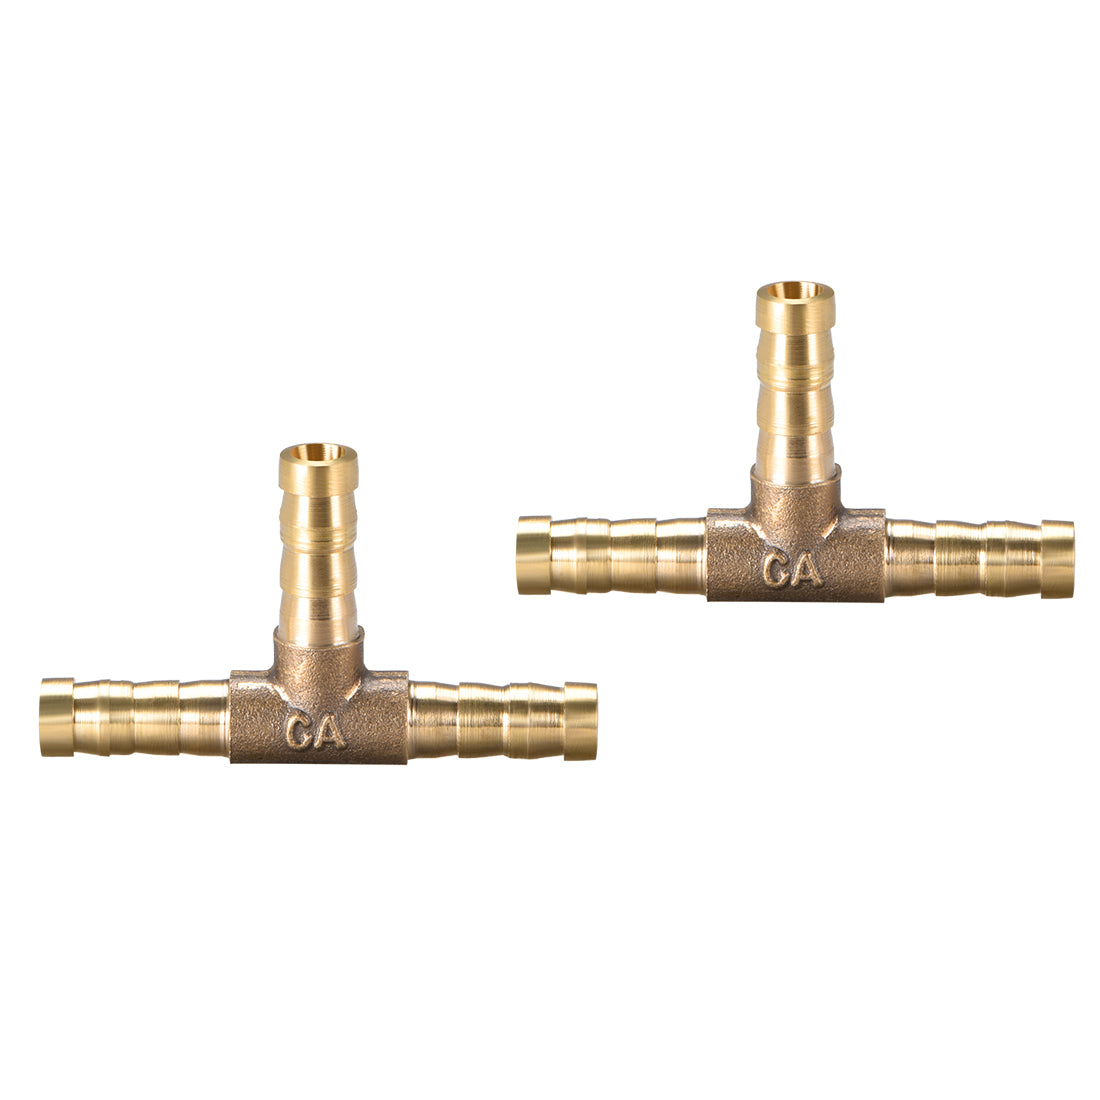 Uxcell Uxcell 16mm or 5/8" ID Brass Barb Splicer Fitting,T-Shaped 3Way,Barb Hose Fitting